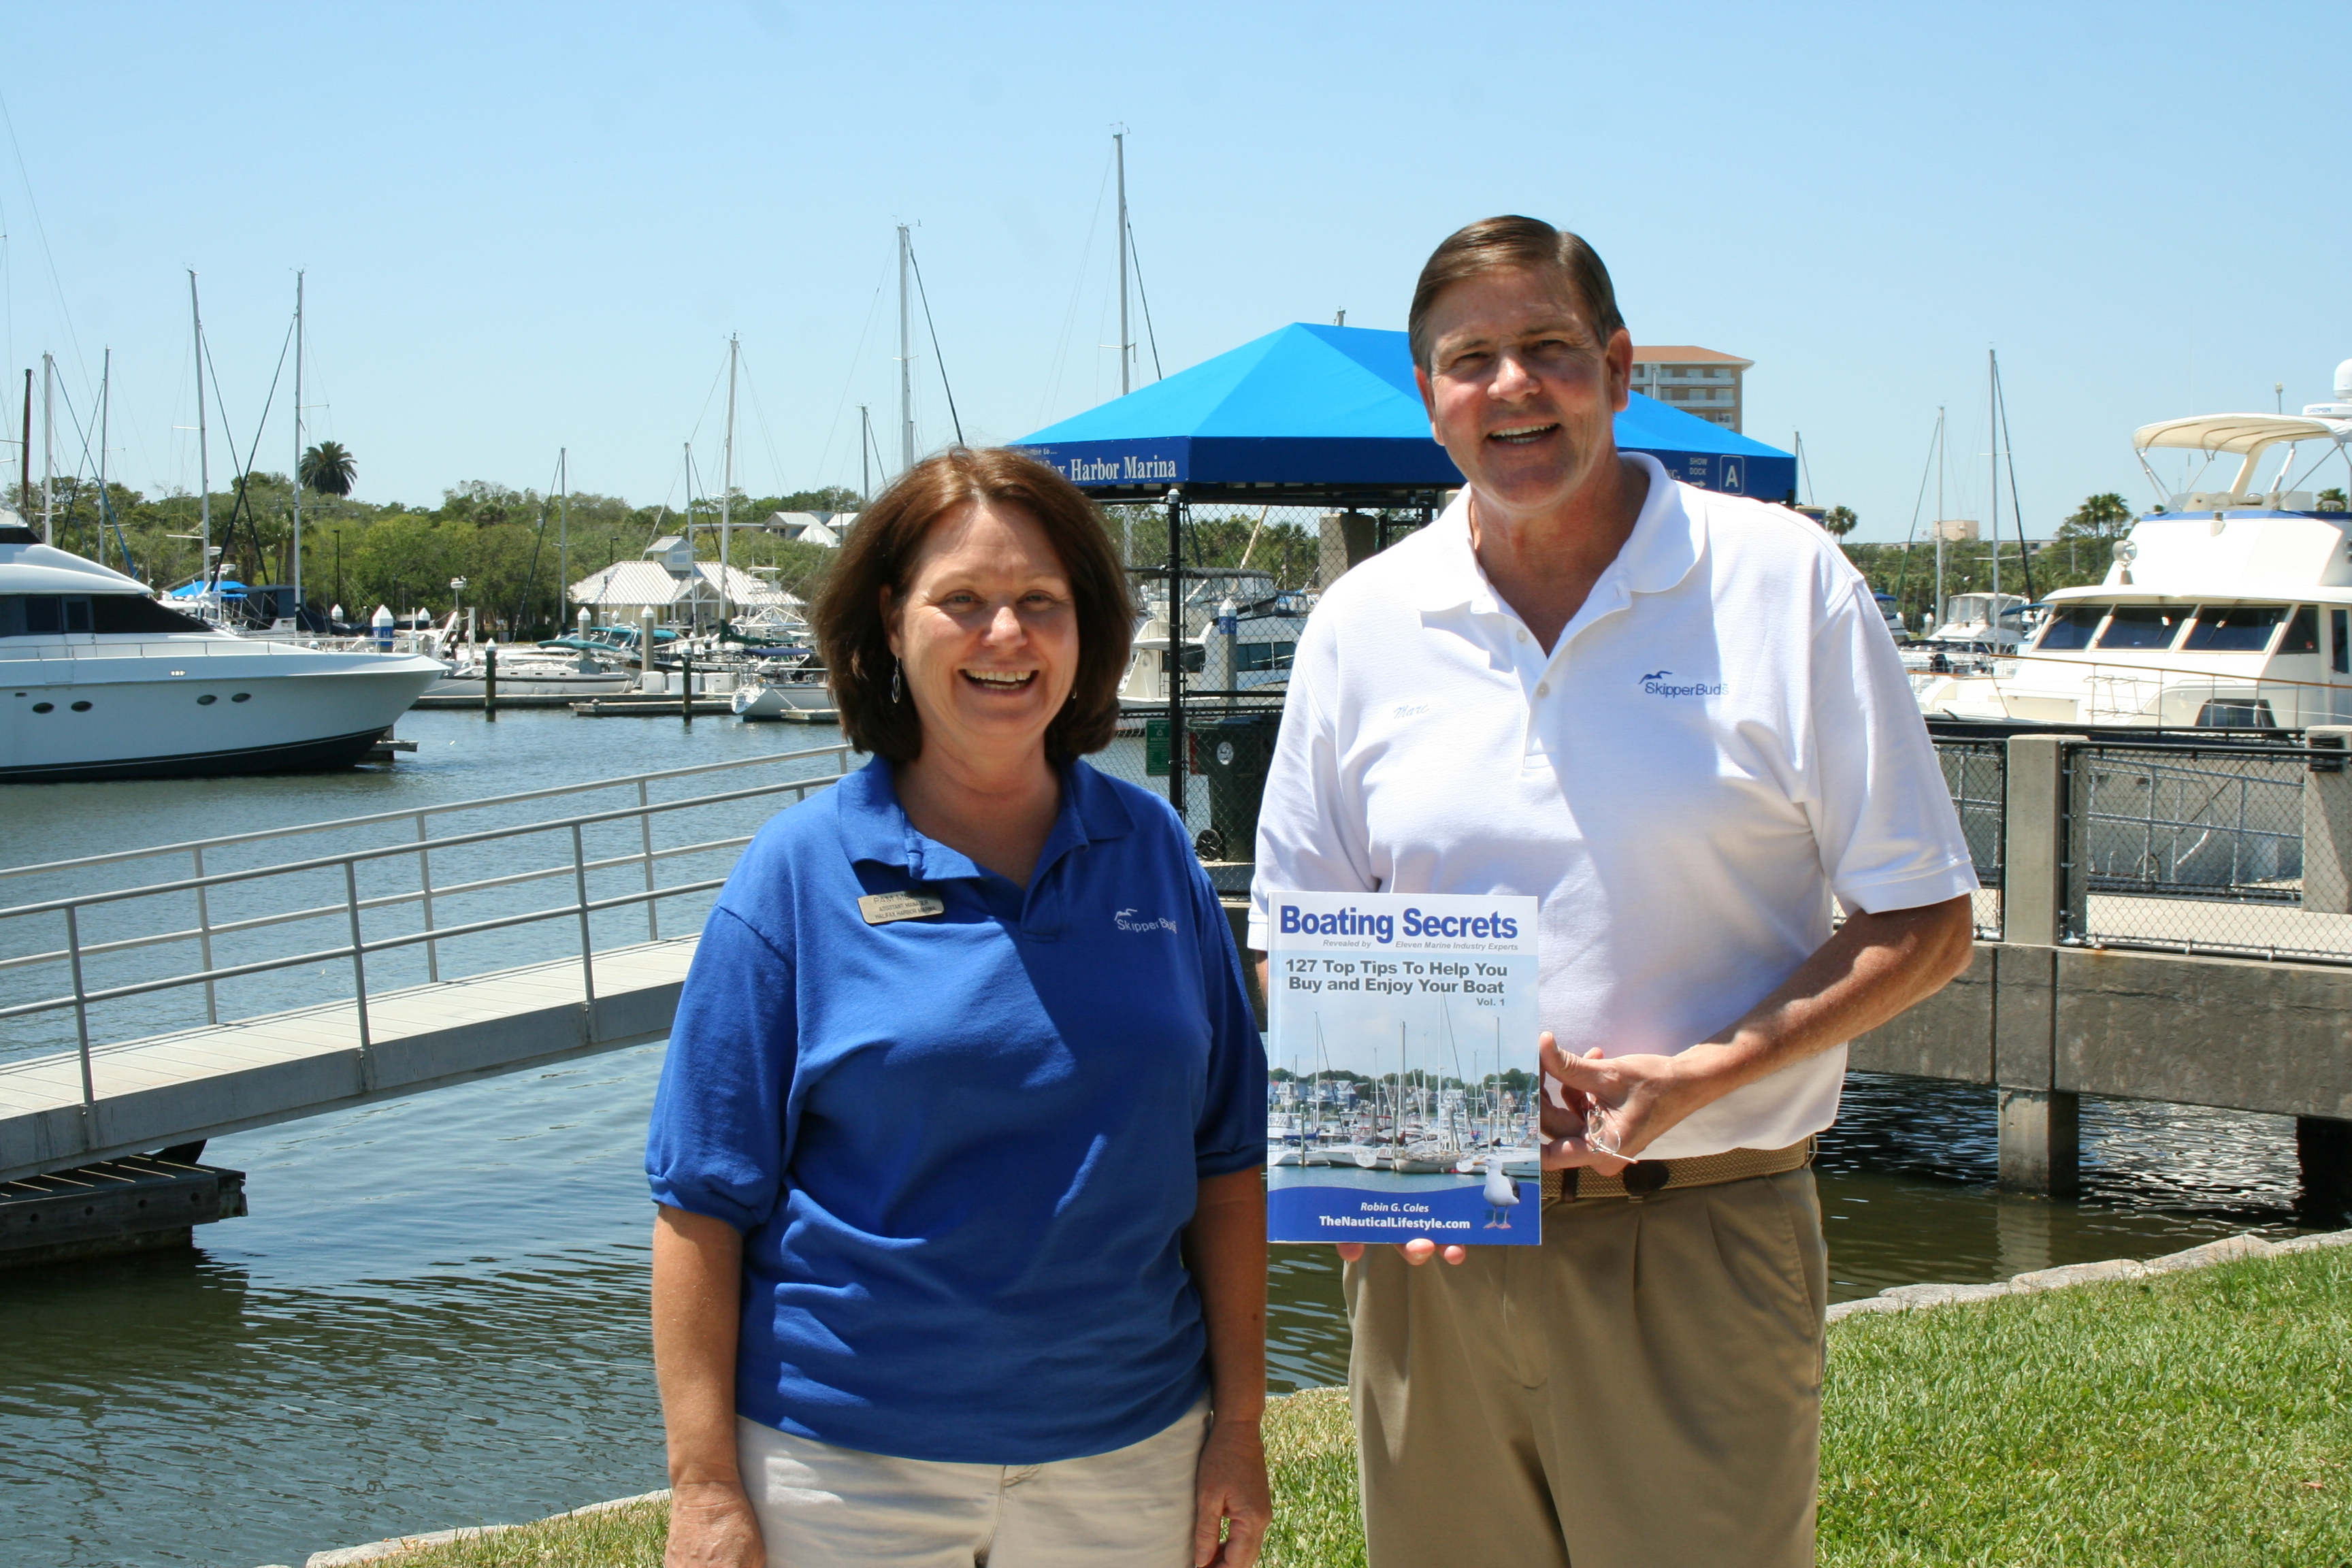 Marc Philips and Pam at Halifax Harbor Marina Daytona FL and Boating Secrets: 127 Top Tips to Help You Buy and/or Enjoy Your Boat Book